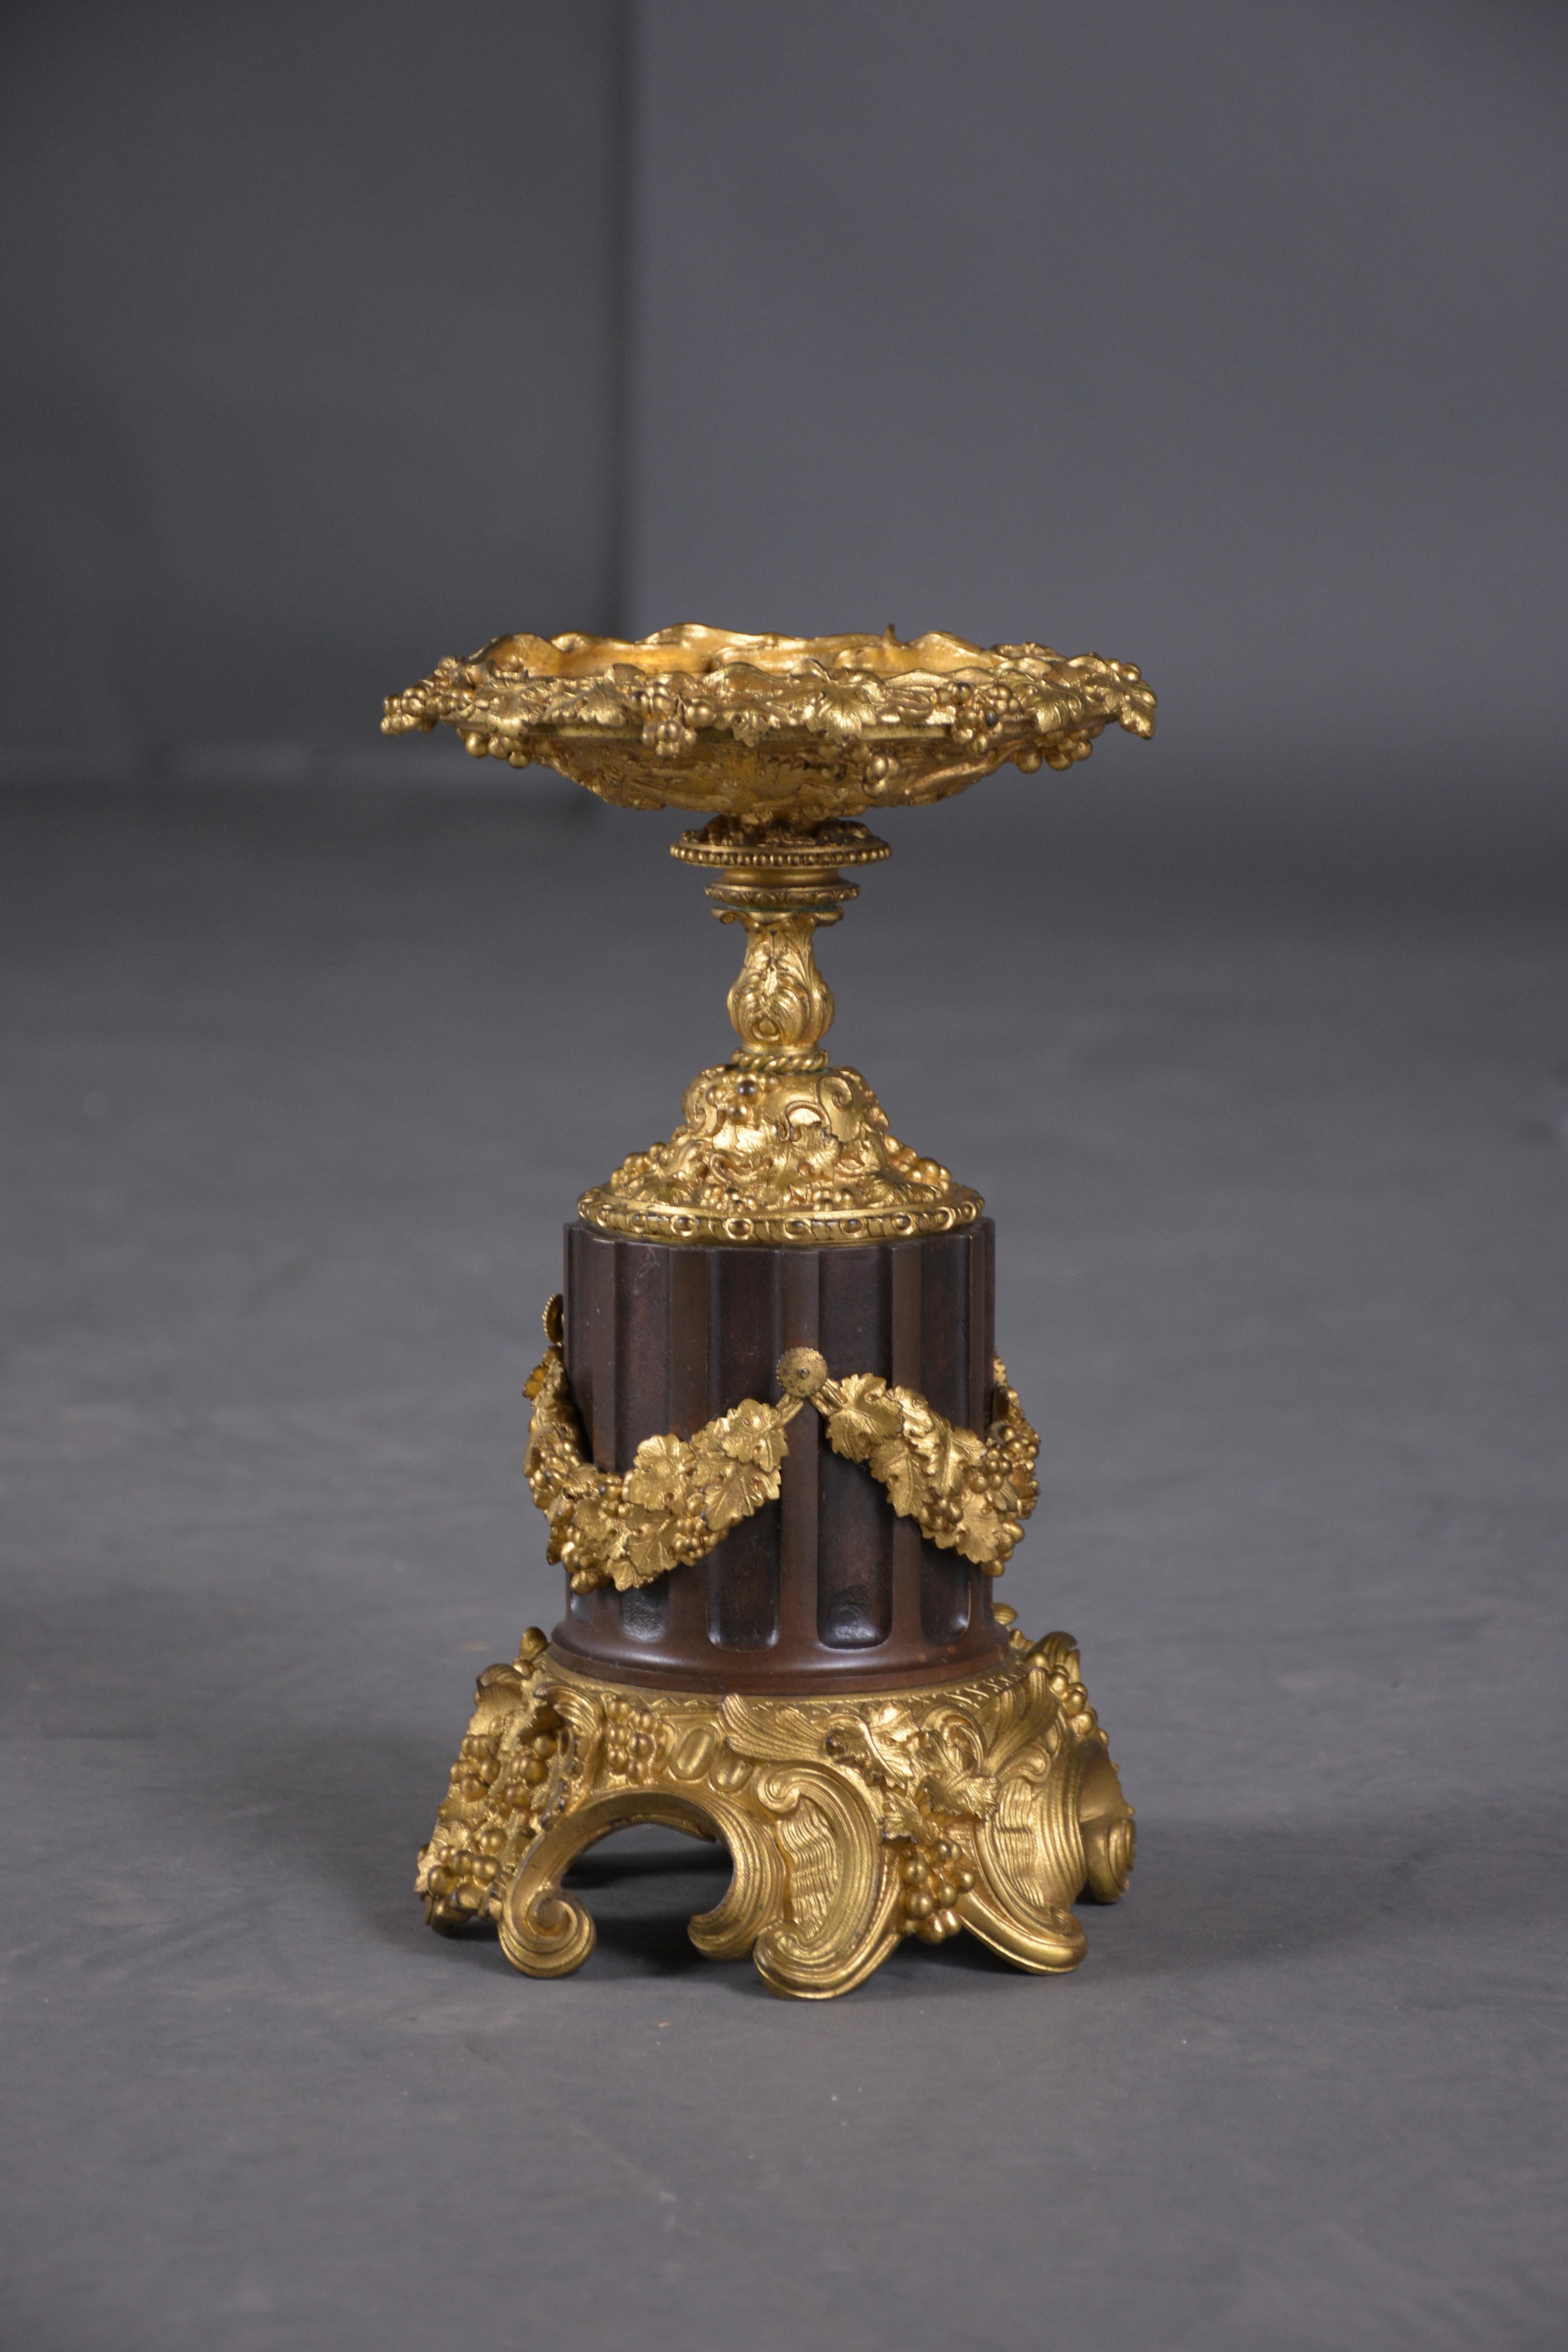 Elegant 19th-Century French Bronzed Urns with Gold Ormolu Details 1